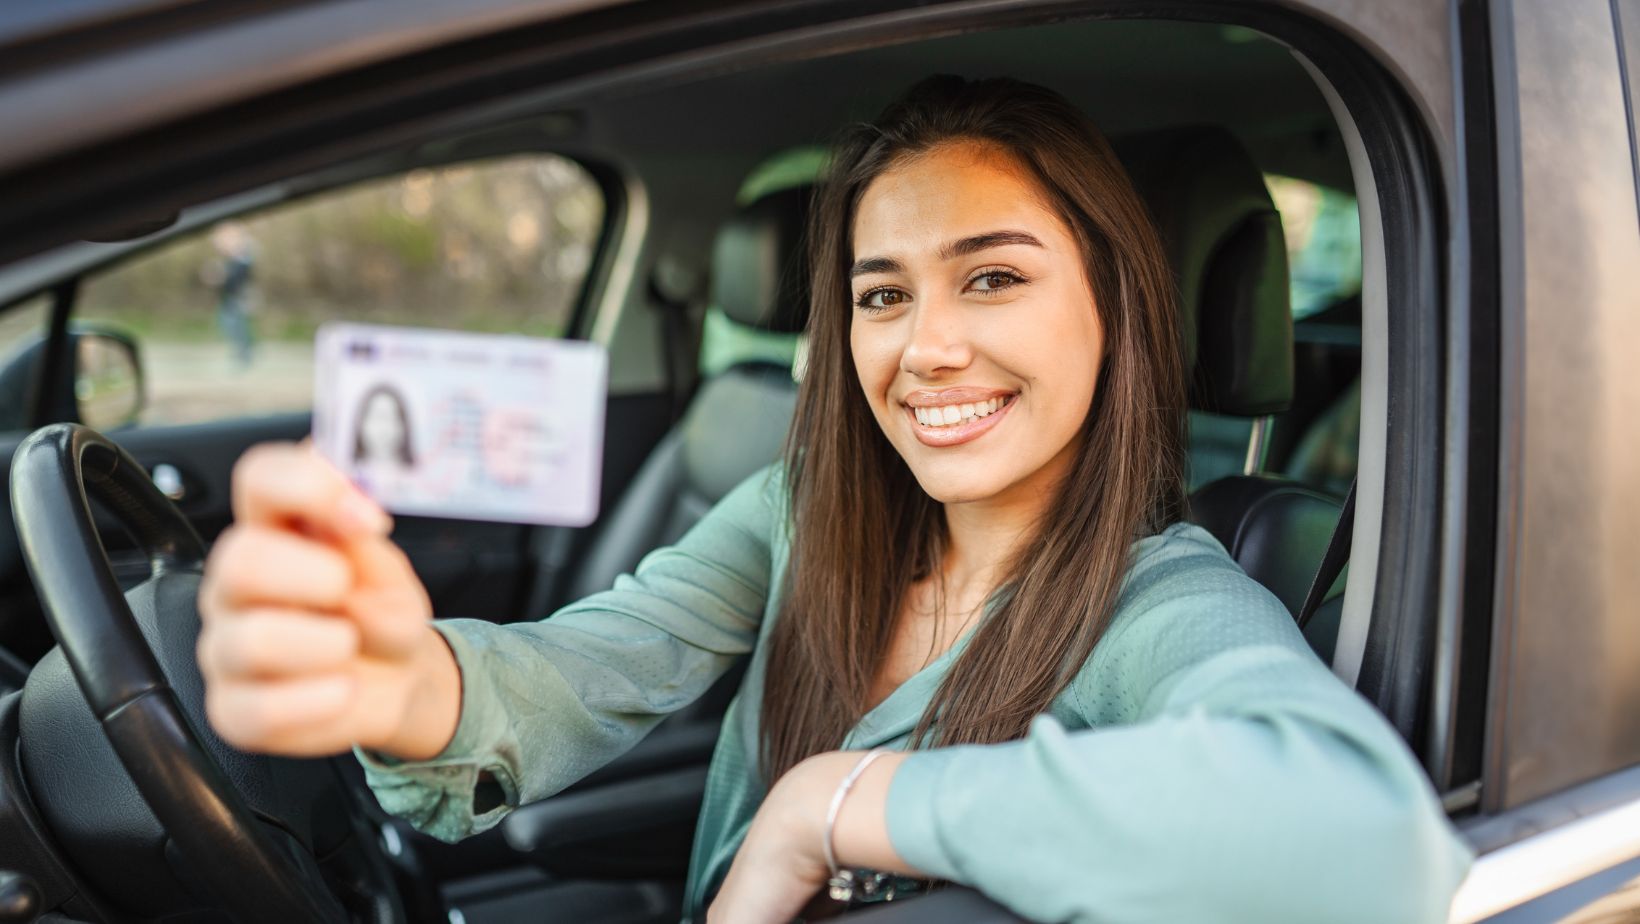 an individual can legally have both a texas driver license and a texas id card? *